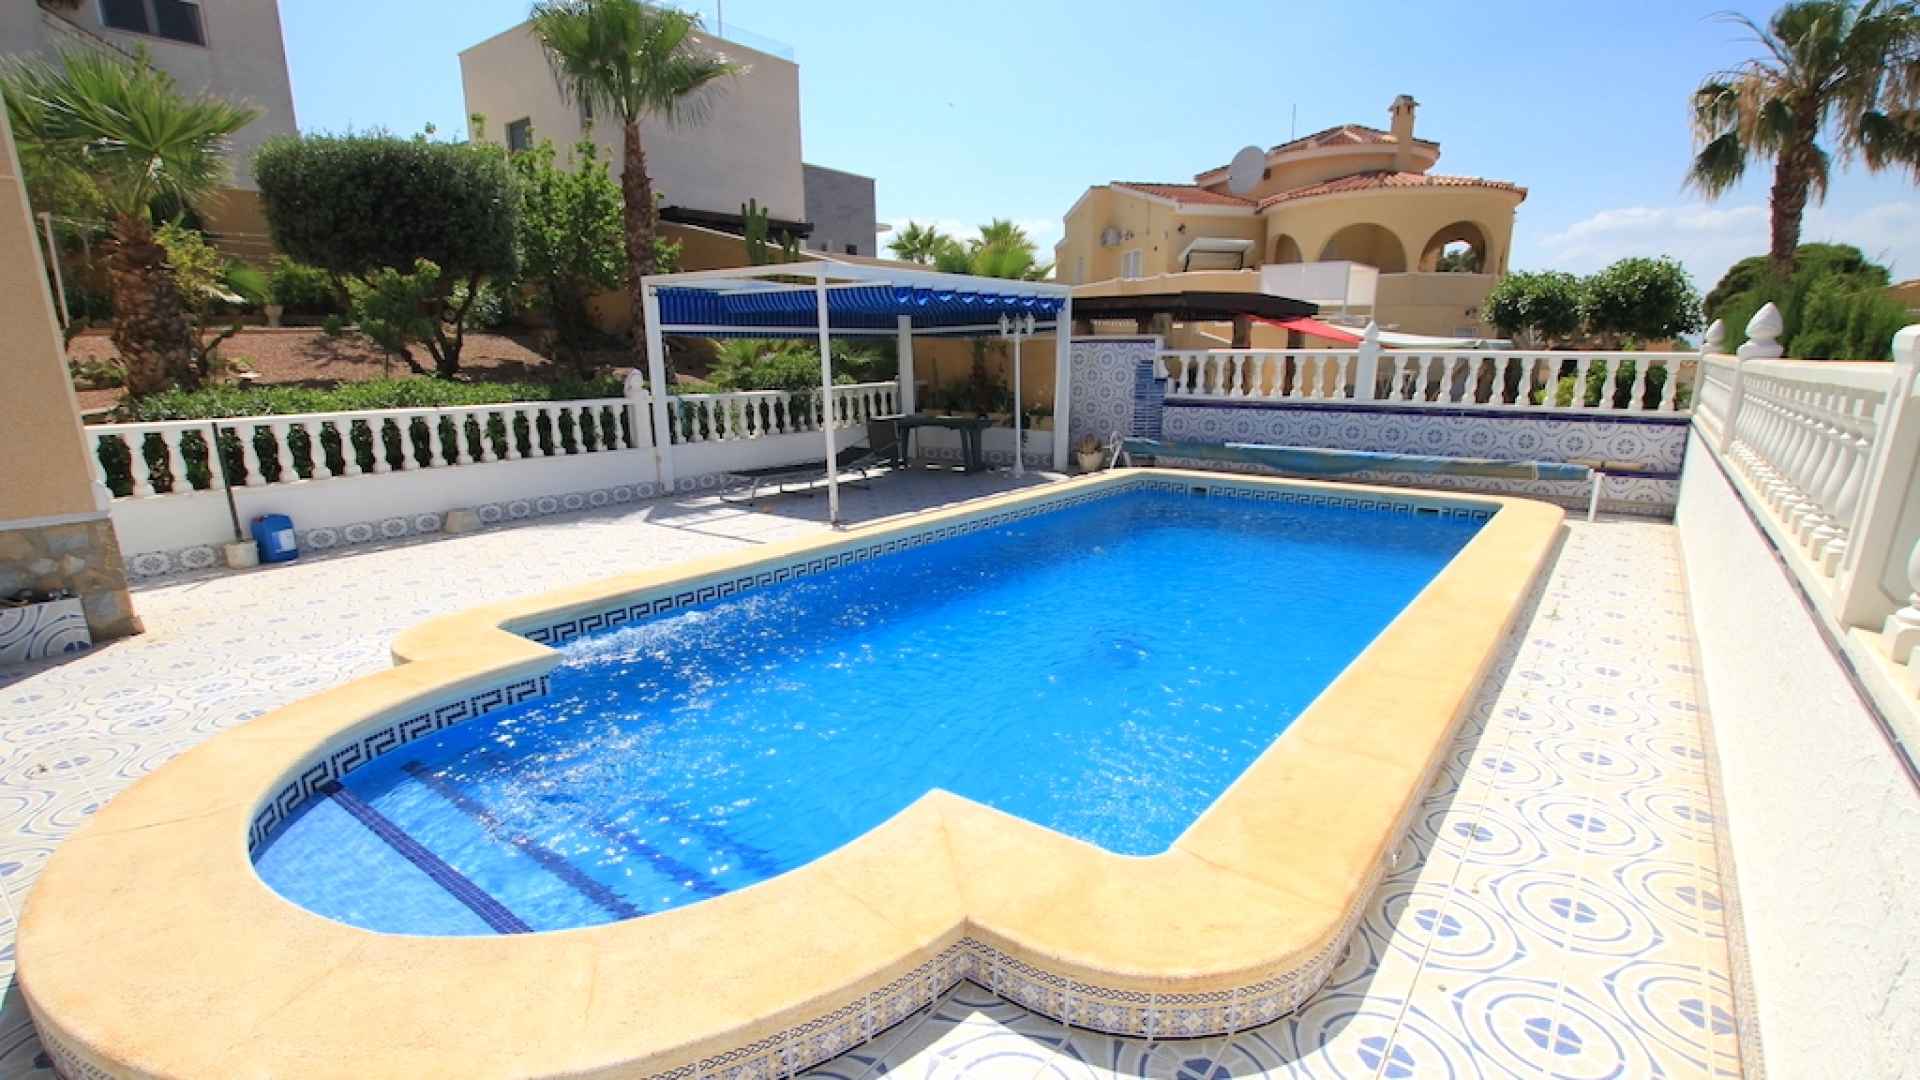 48133_spacious_210sqm_detached_villa_with_internal_garage___private_pool_260623093704_img_5896